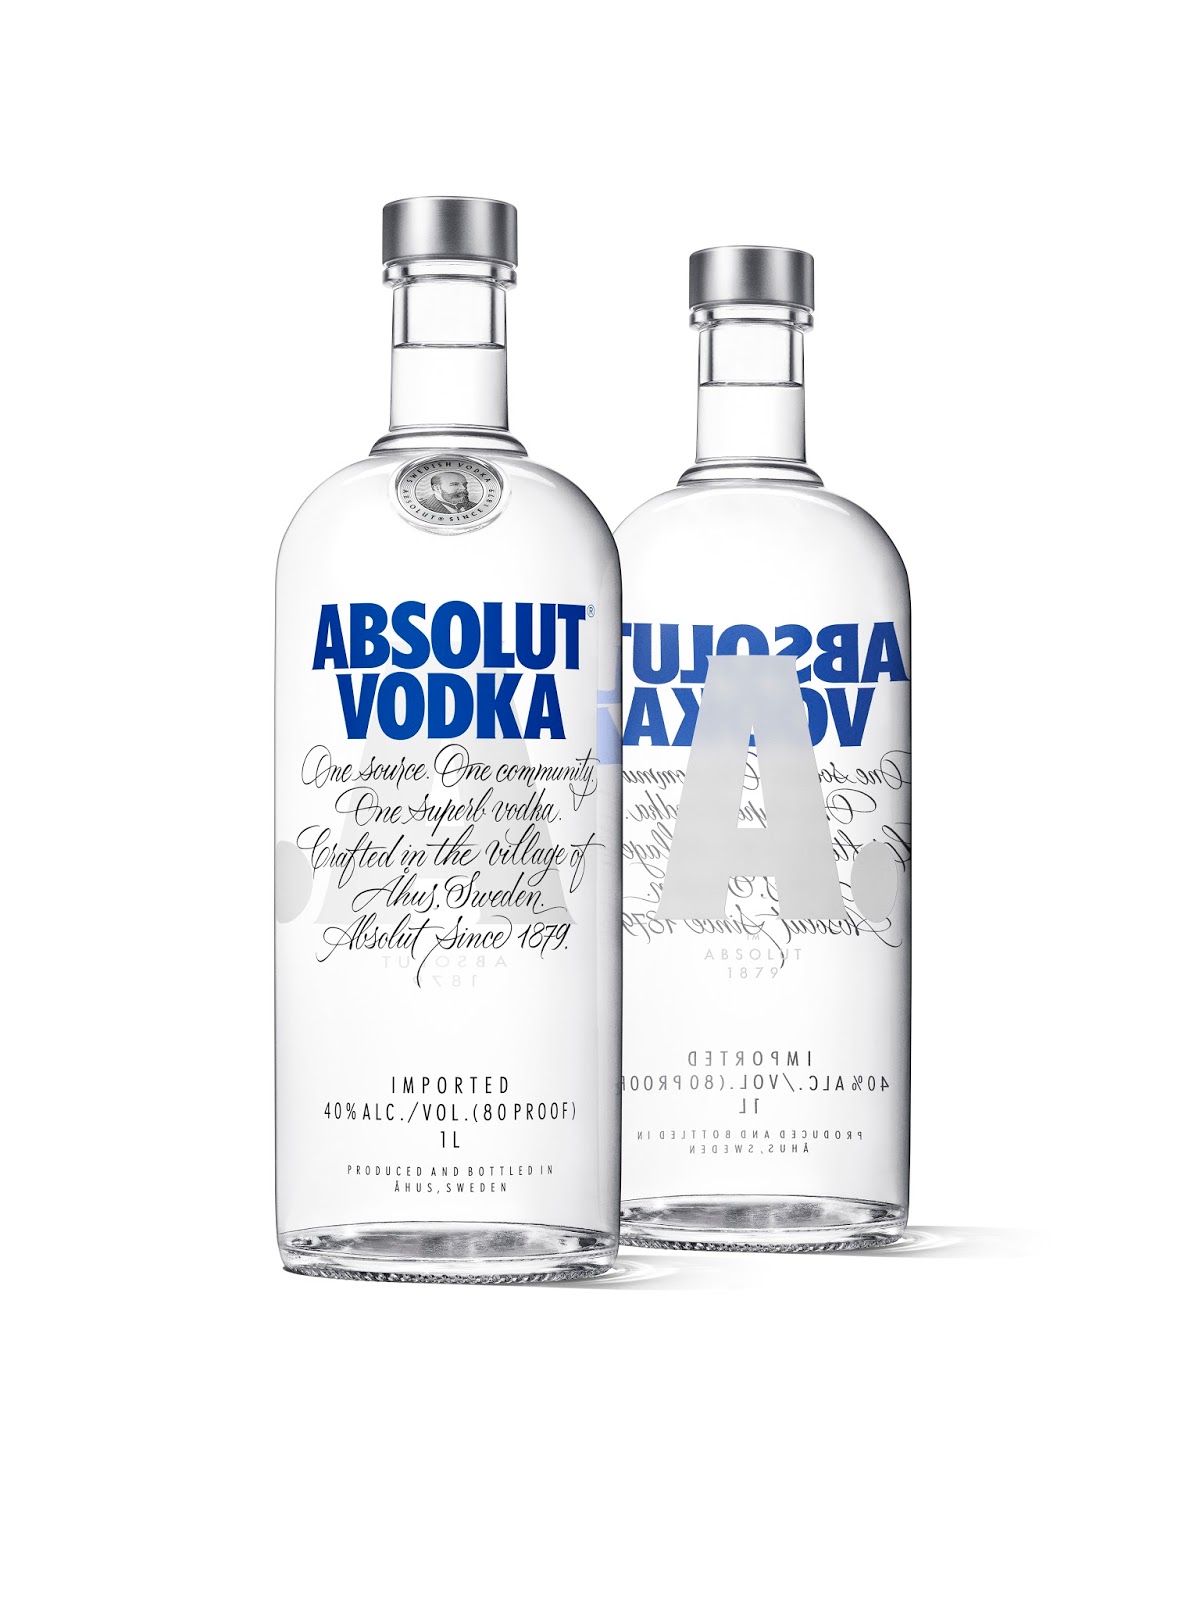 ABSOLUT-redesign-01